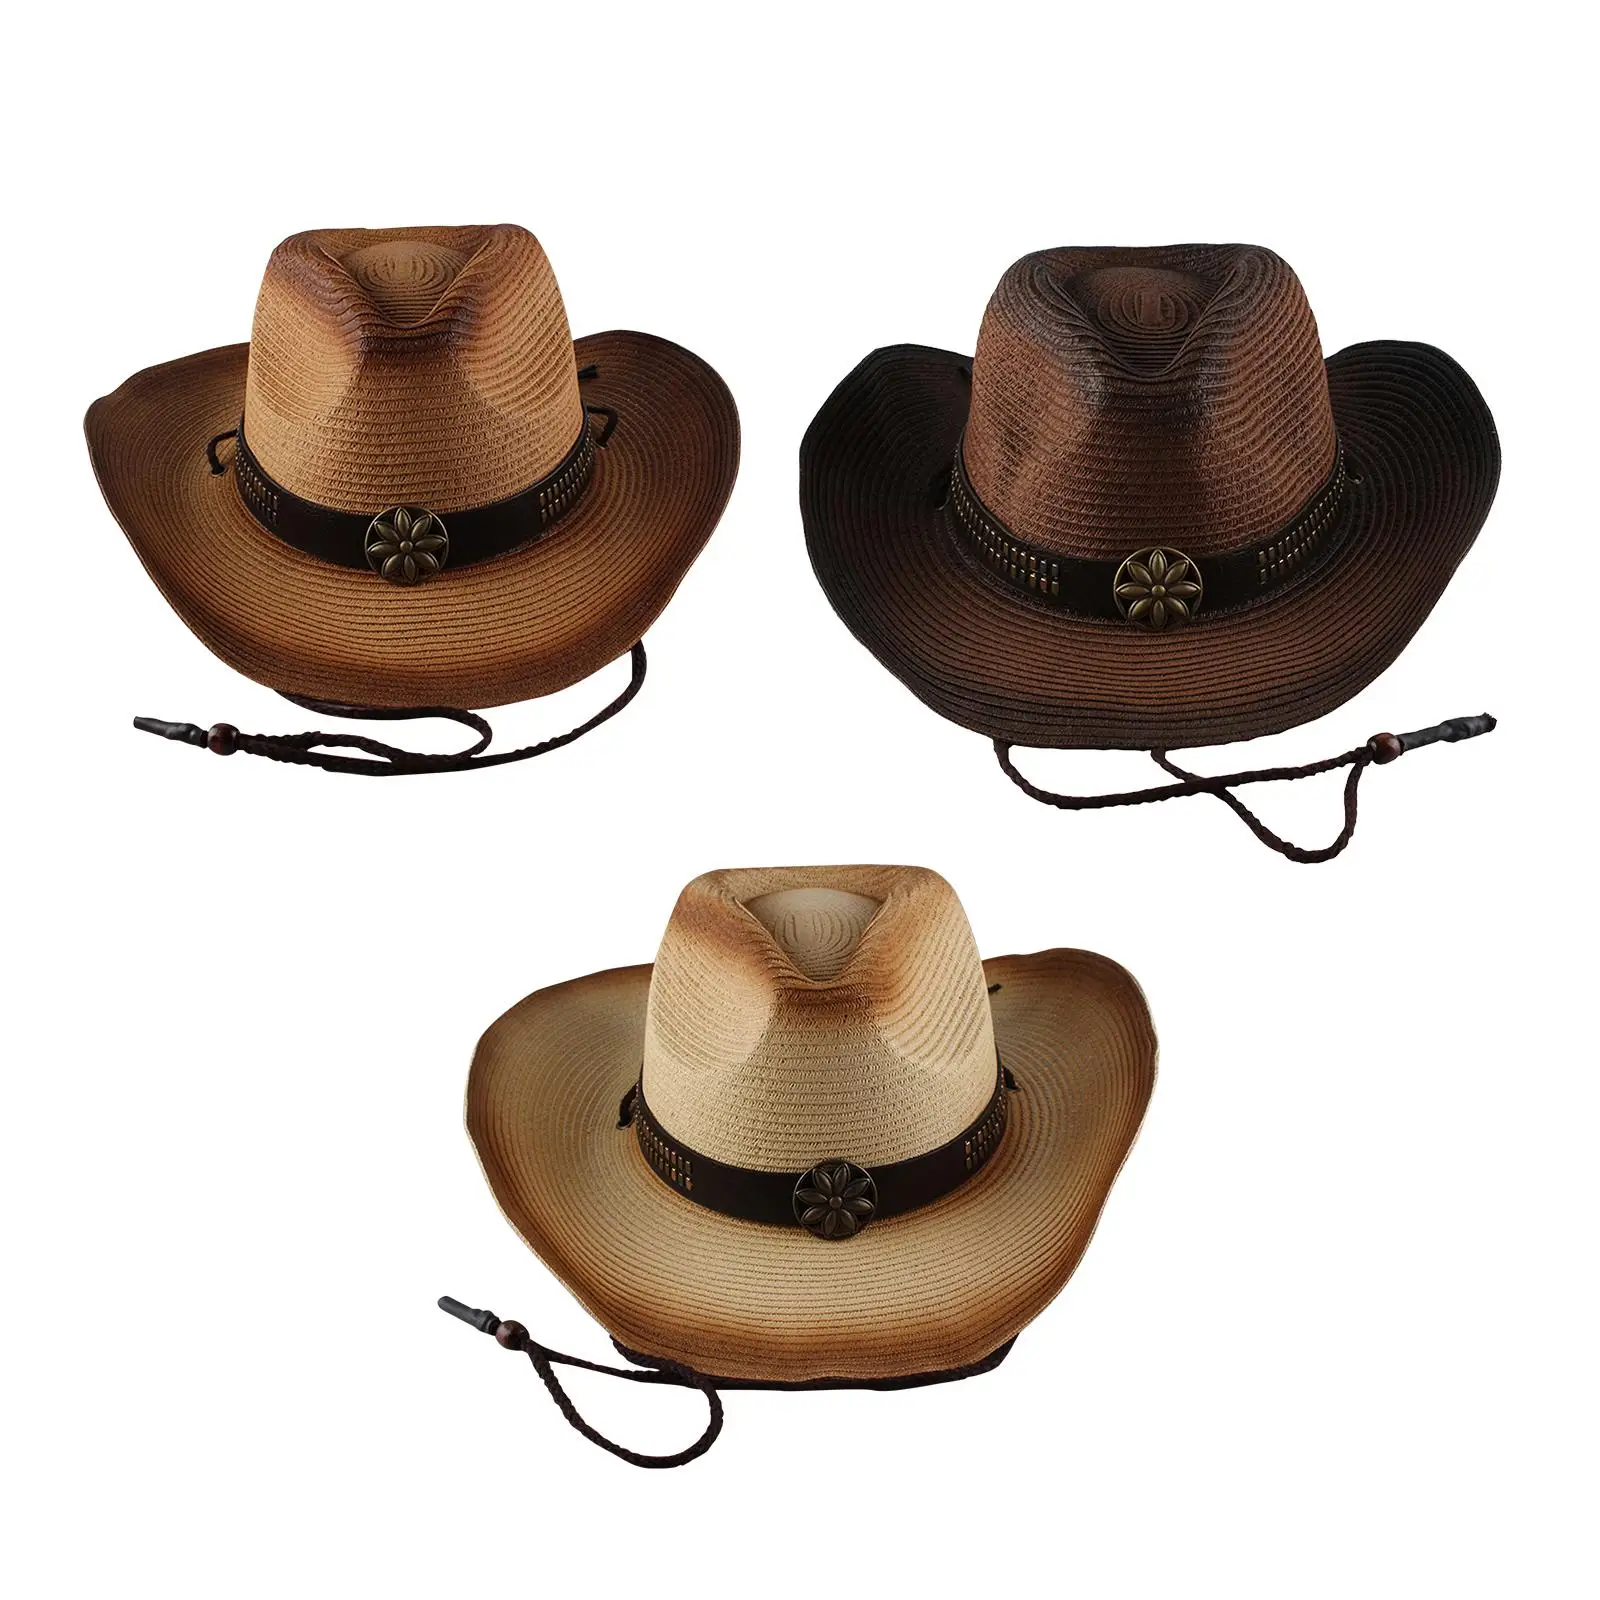 Women and Men Western Style Cow boy Hat Wide Brim Panama Cowgirl Hat with Lanyard with Buckle Sun Hat Fashionable for Travel